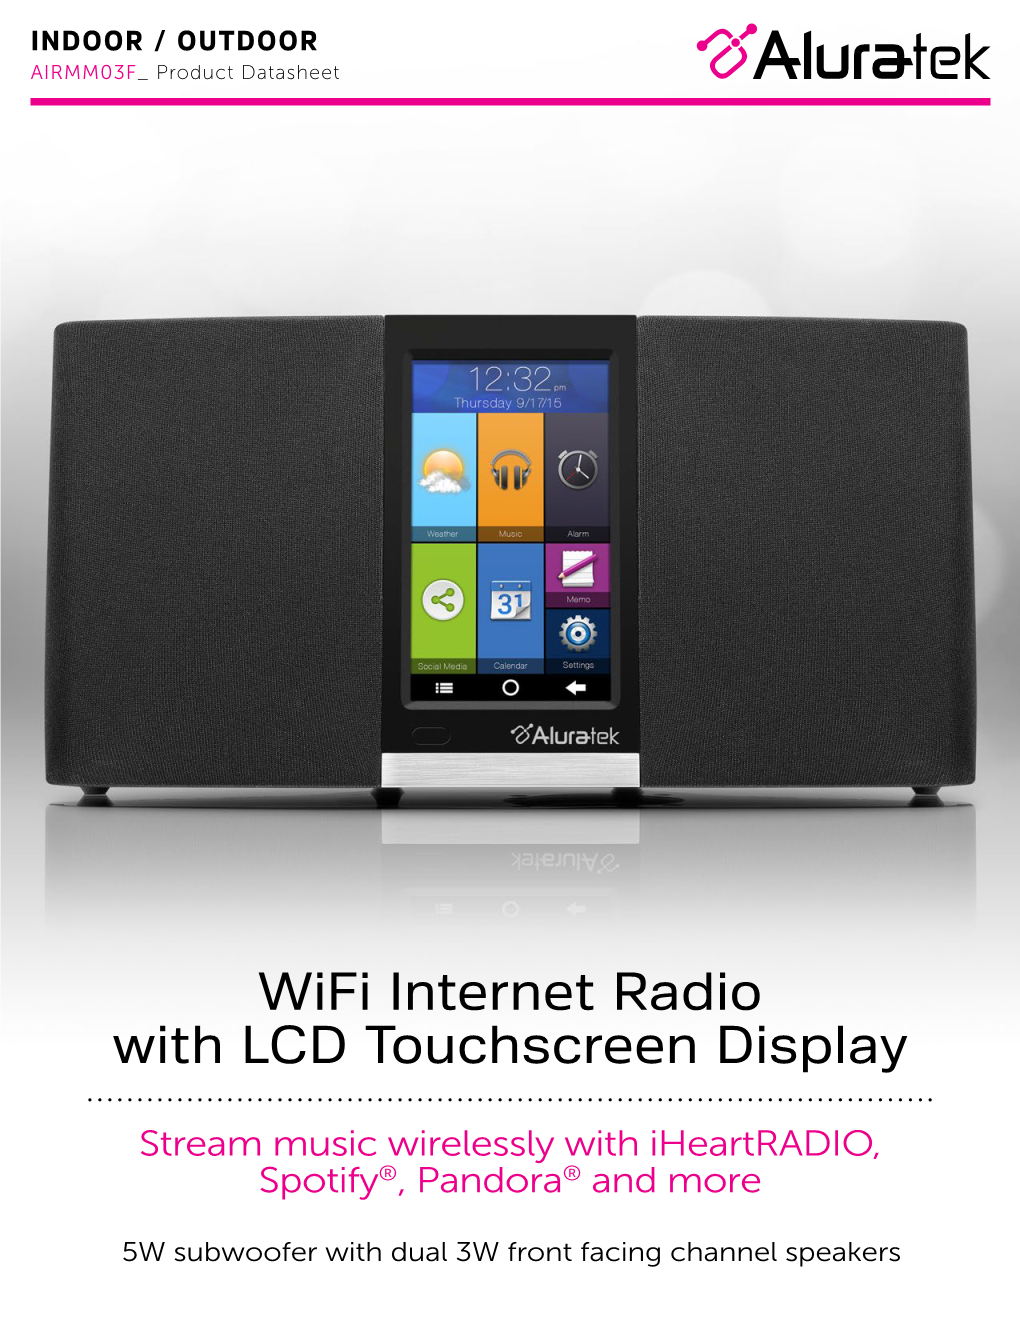 Wifi Internet Radio with LCD Touchscreen Display